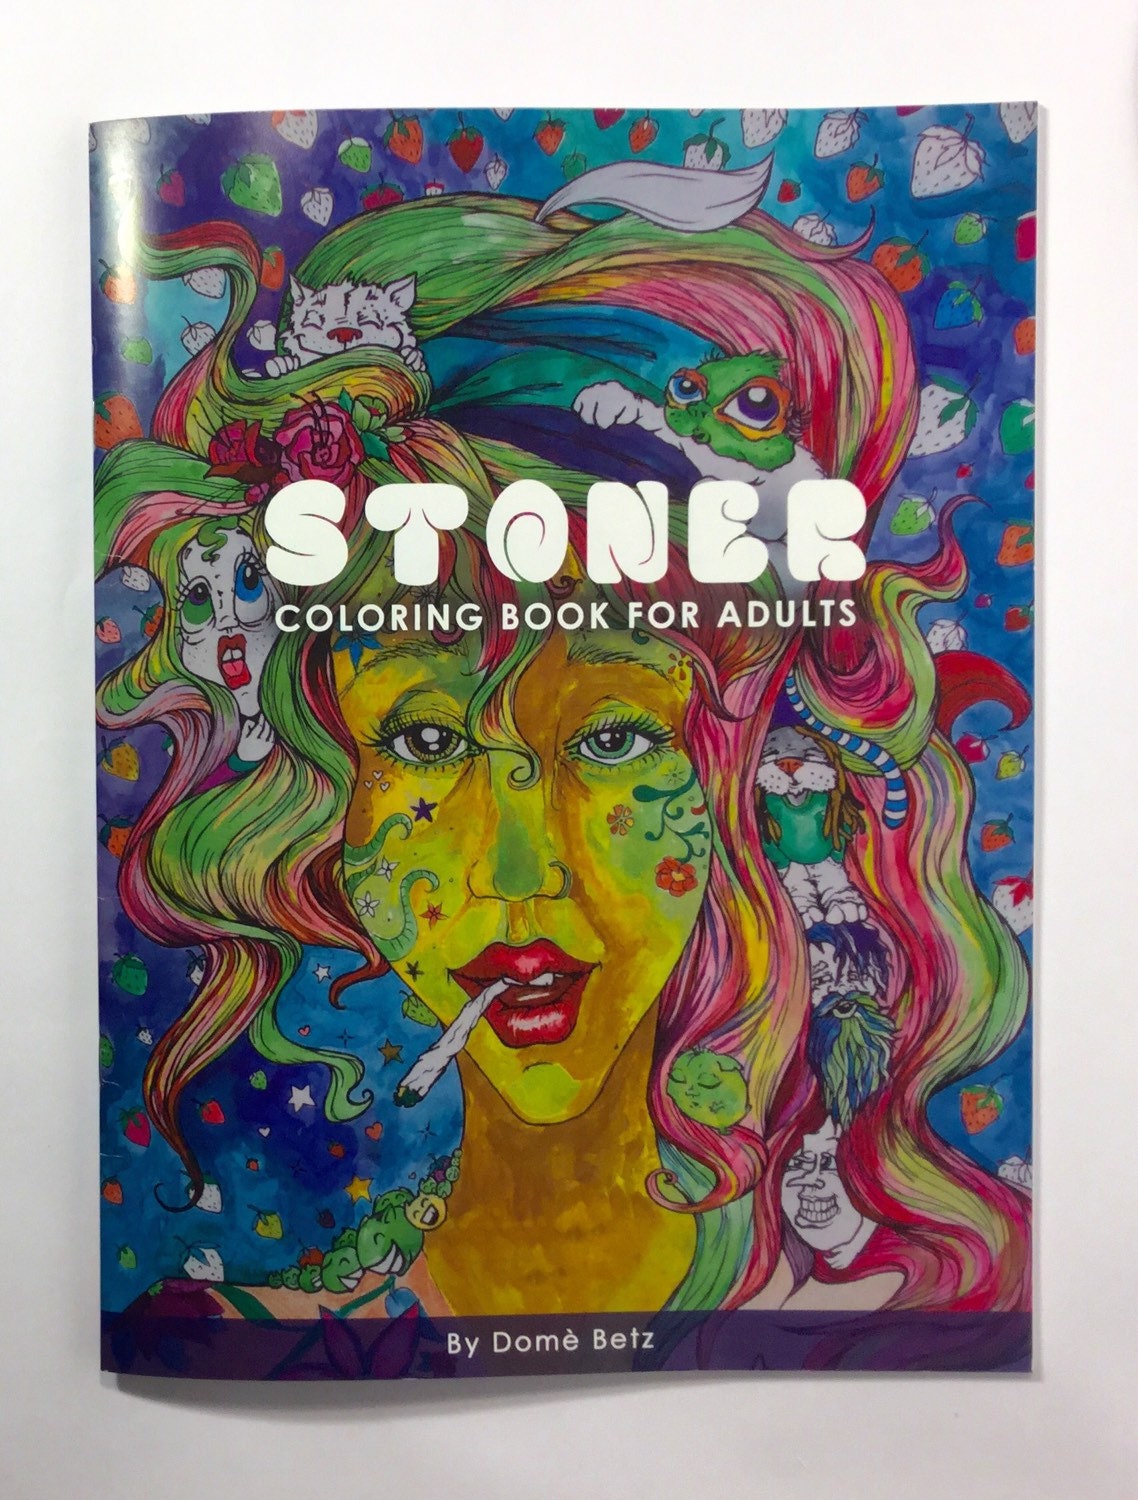 Download Stoner Coloring Book for Adults weed stuff adult coloring